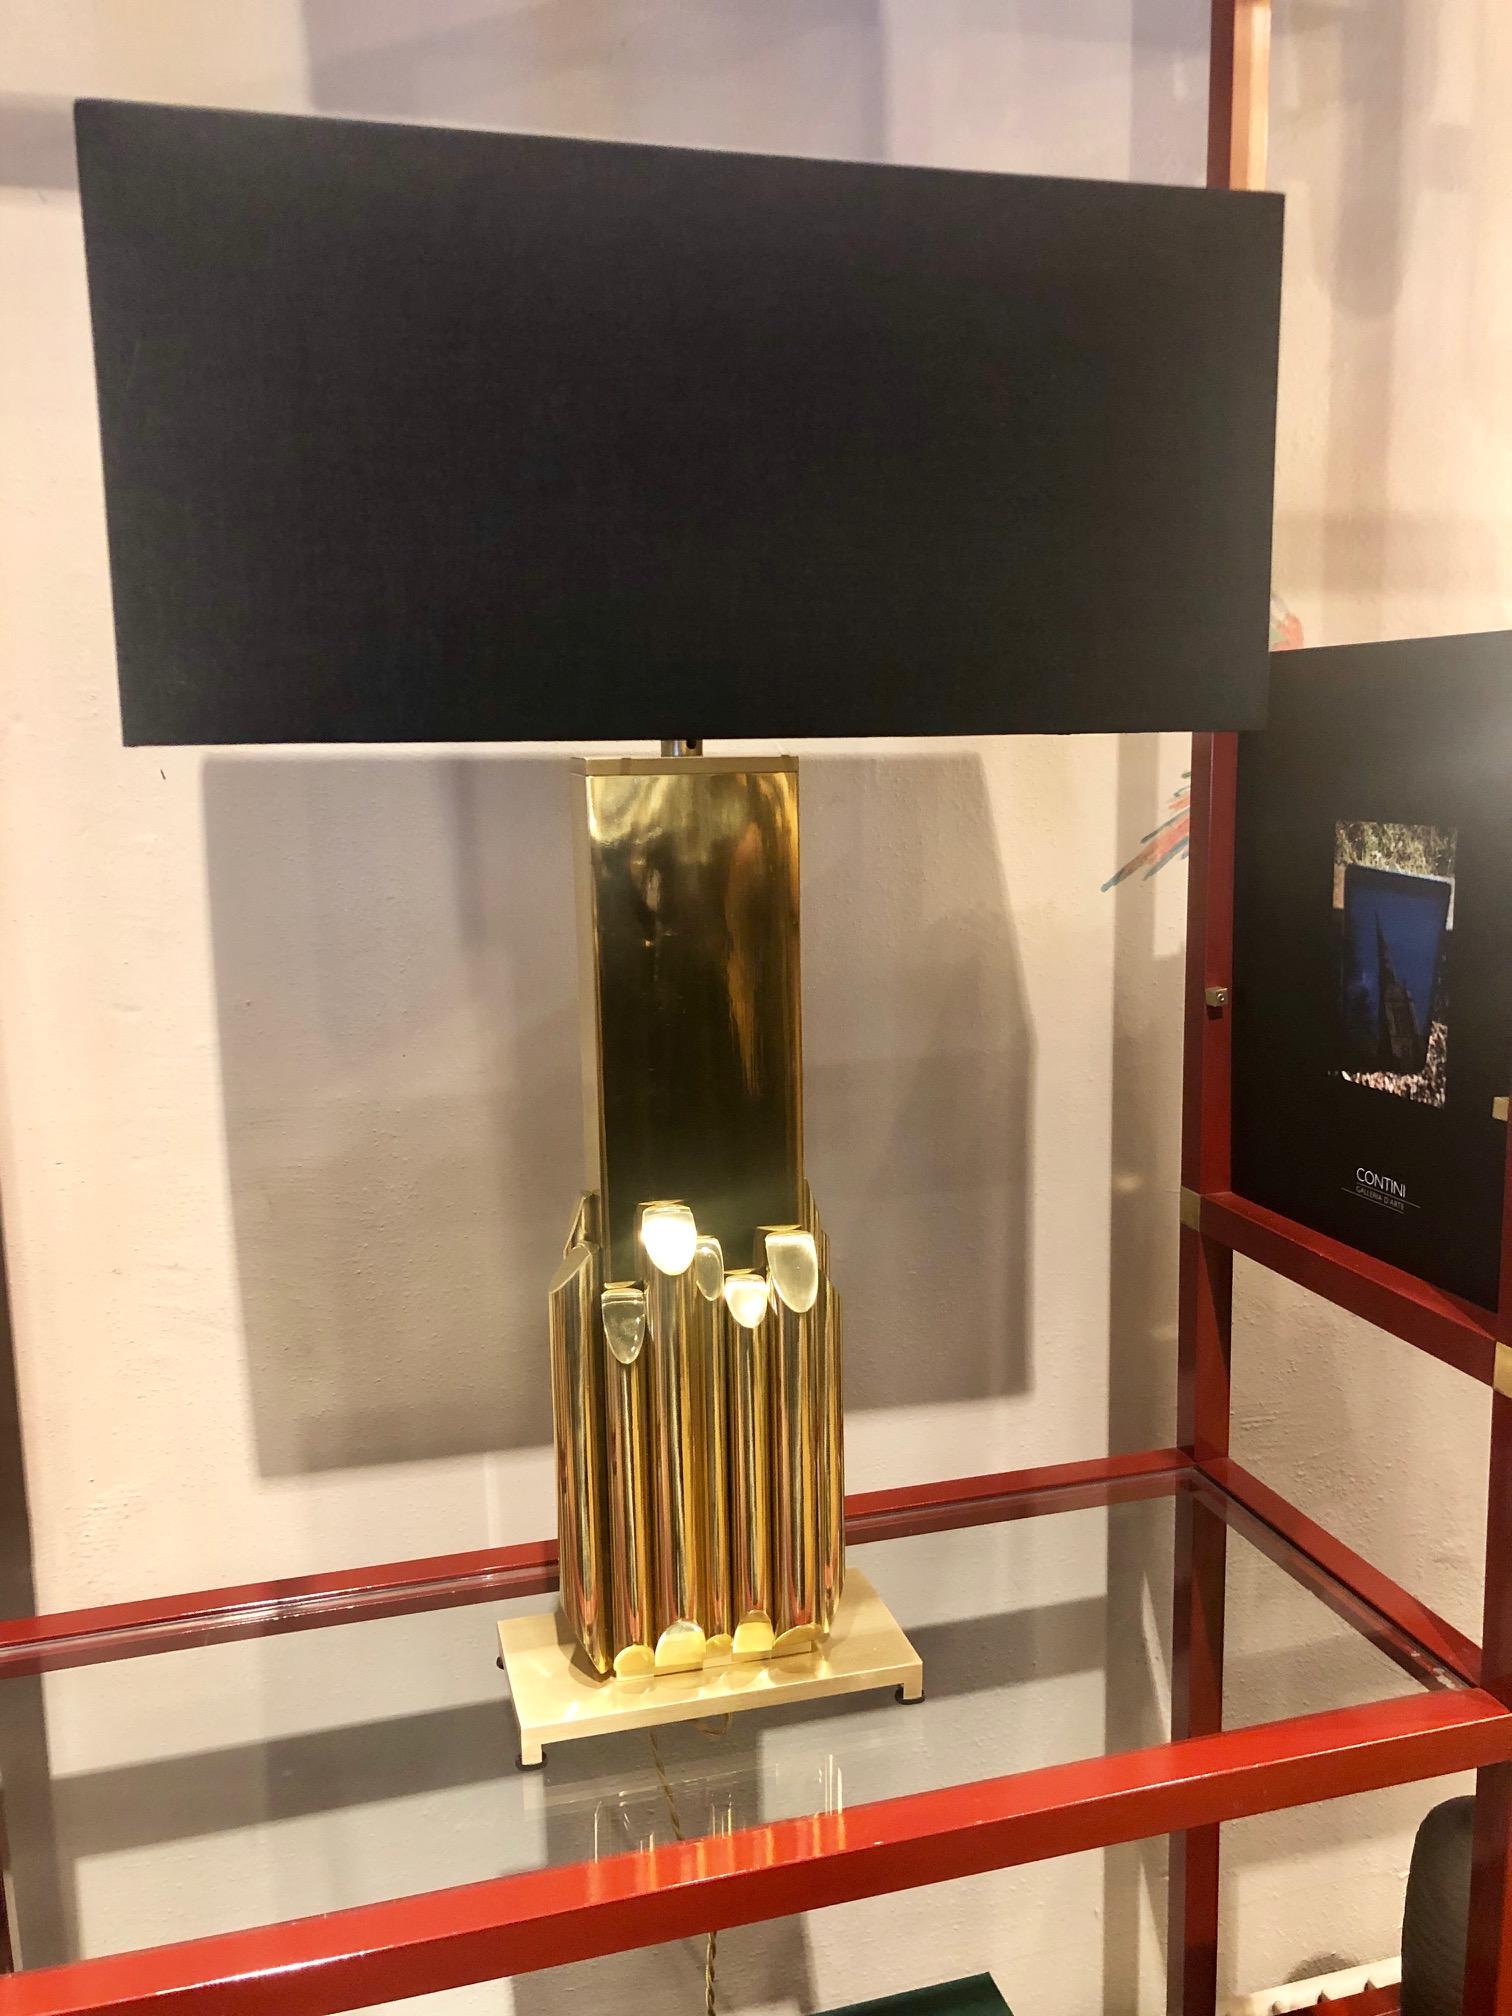 Solid brass plate table lamp design by Luciano Frigerio, depict organ pipes, Frigerio Desio (1928-1999)
Made in Italy in 1970s, published in lots of magazines
Frigerio describes himself as a craftsman and for this reason he has never made more than